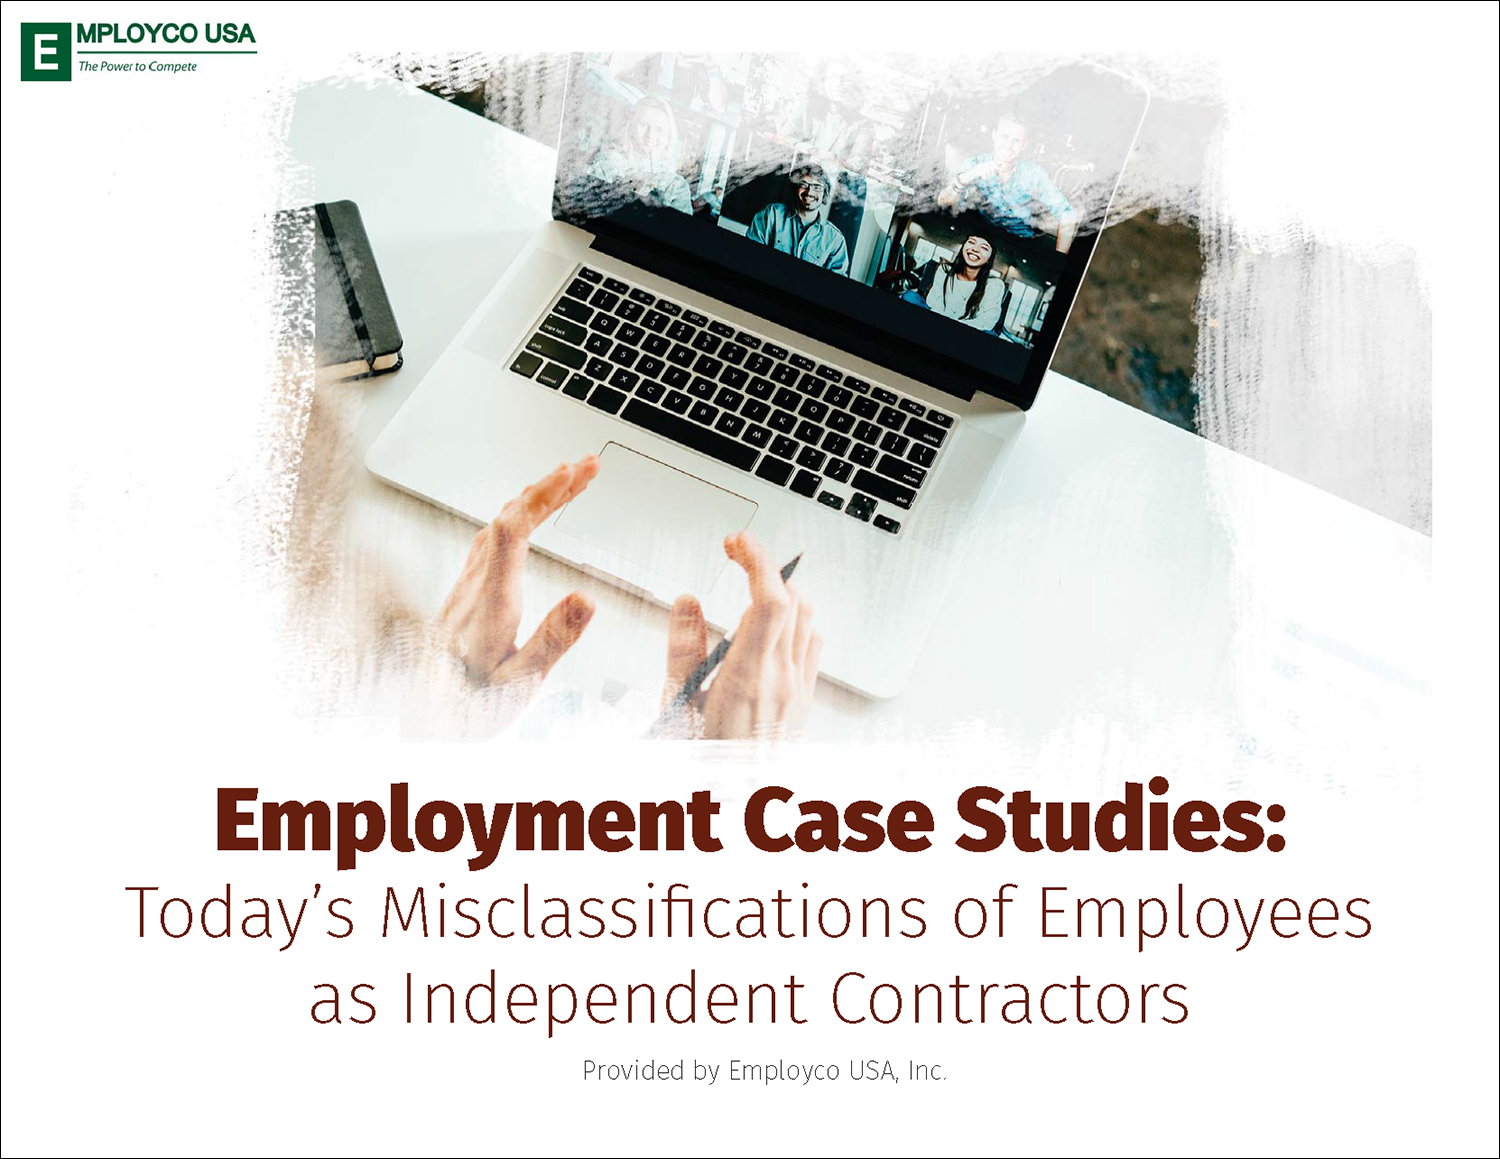 Today’s Misclassifications of Employees as Independent Contractors